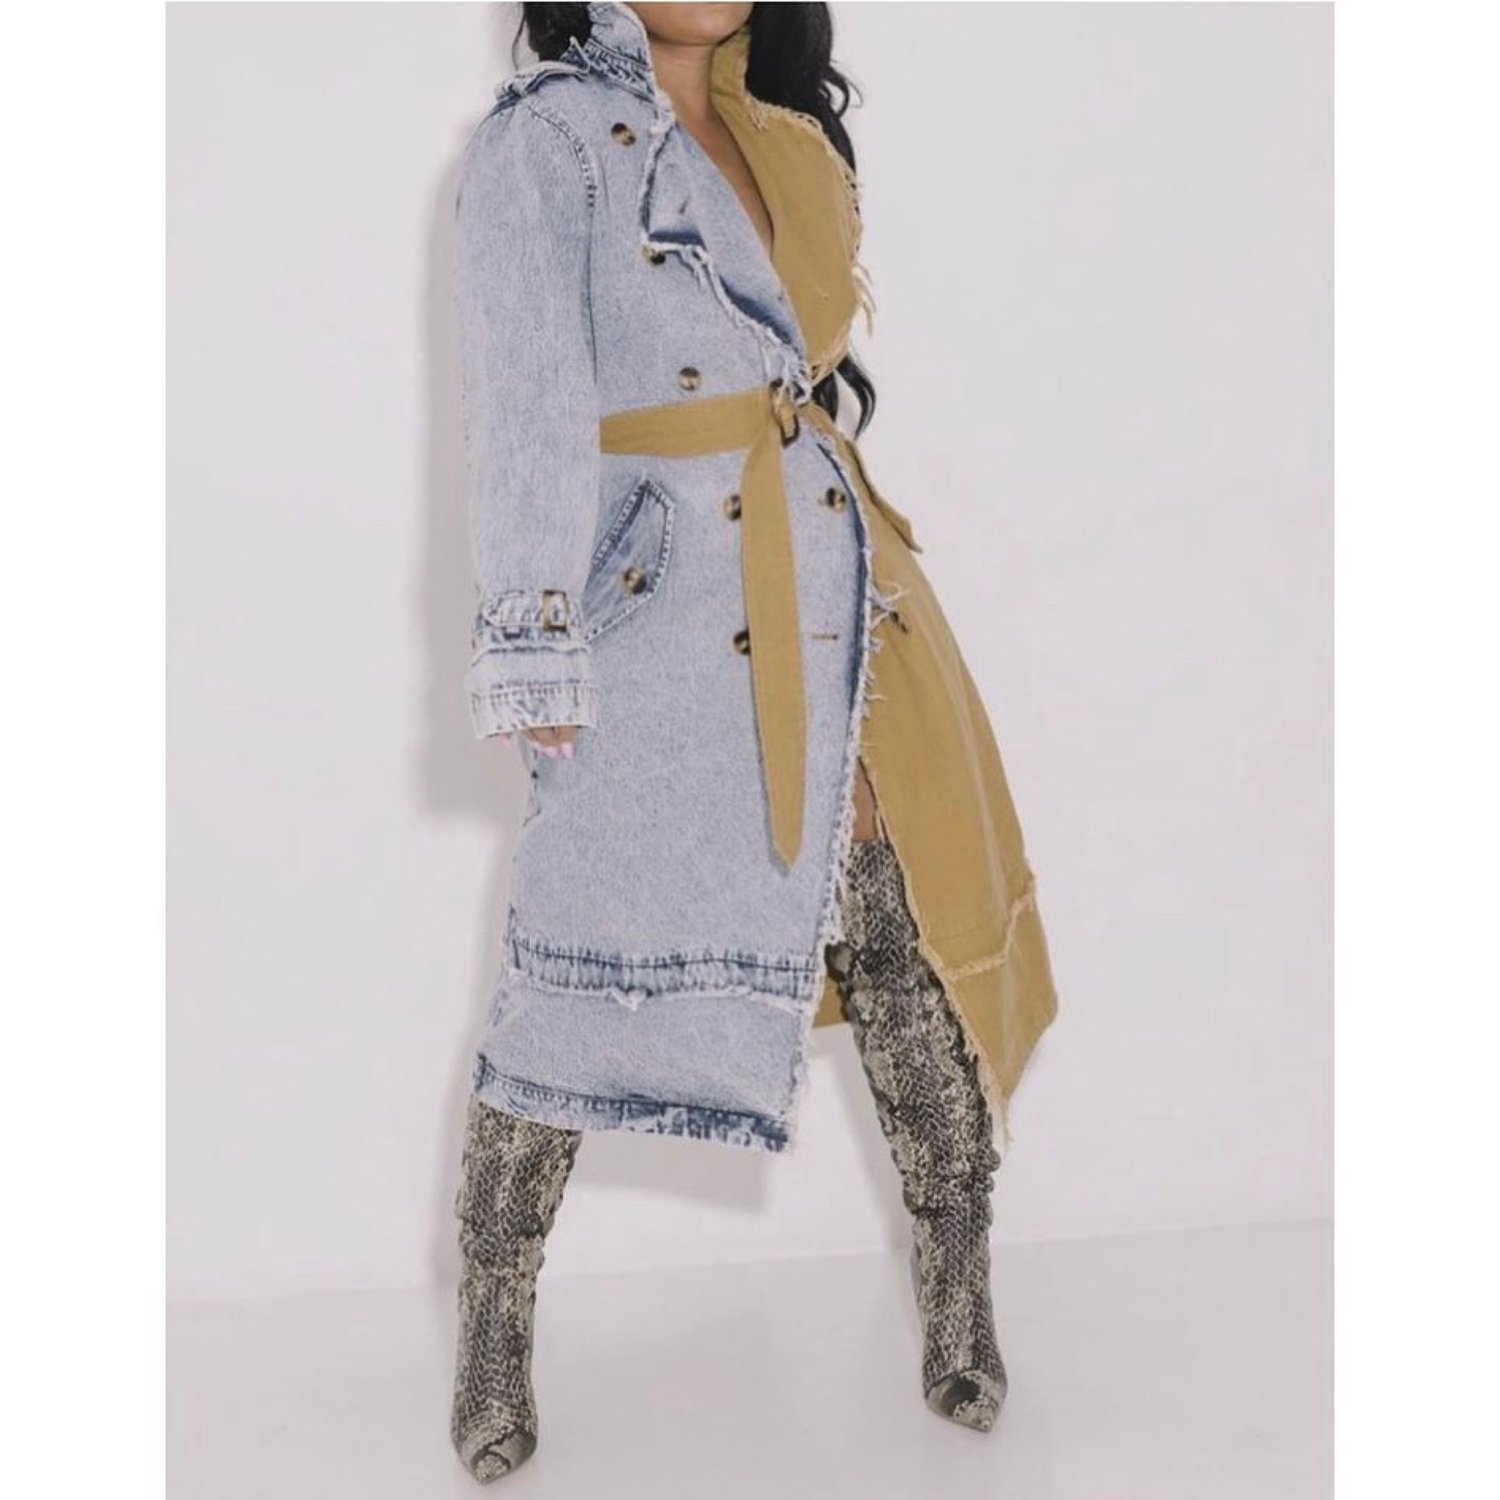 AND IT’S UP DENIM CROSSOVER JACKET/COAT